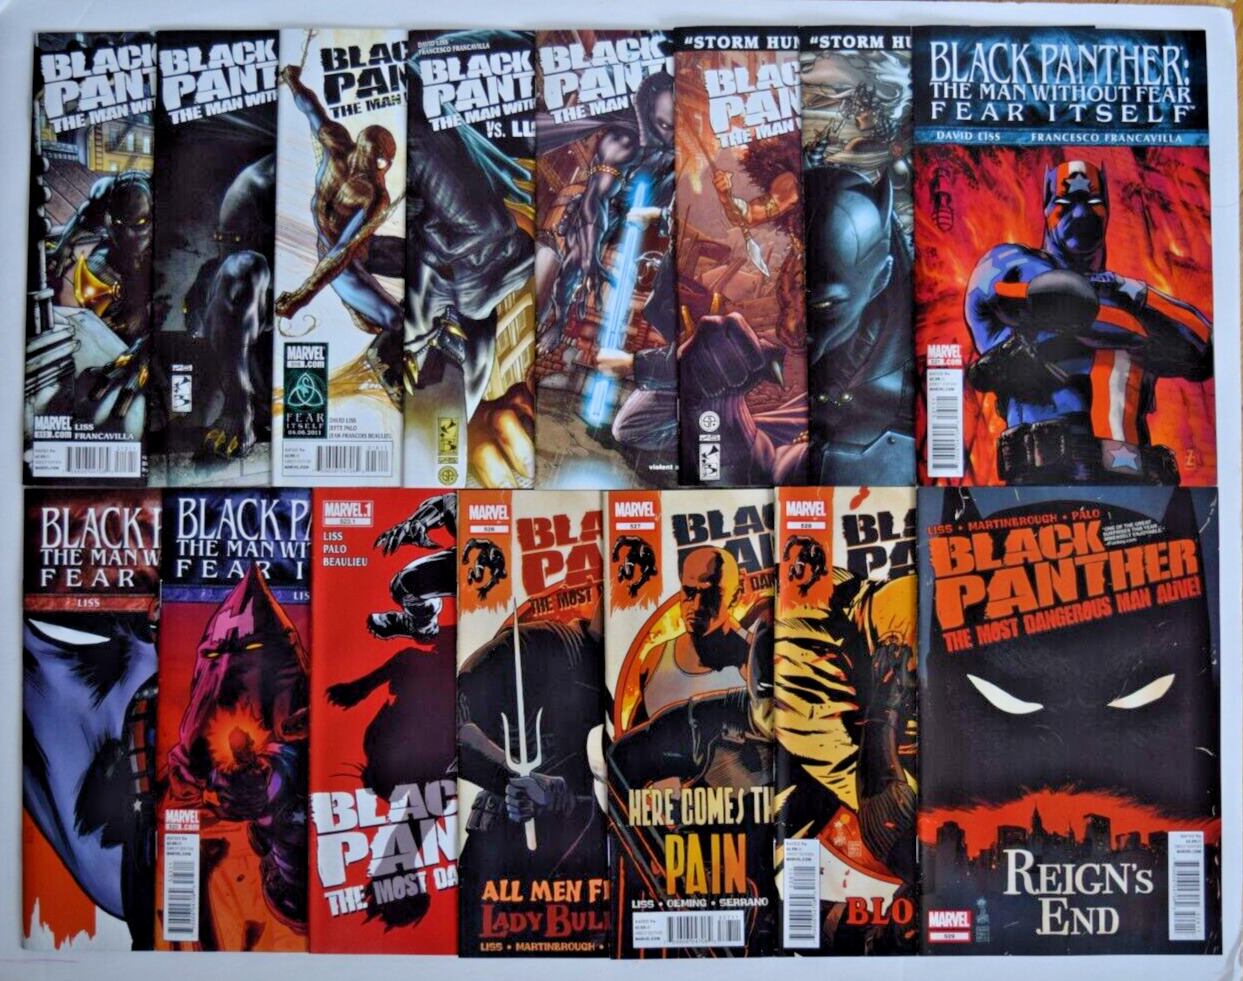 BLACK PANTHER MAN WITHOUT FEAR/MOST DANGEROUS MAN (2010) 15 ISSUE RUN #513-529